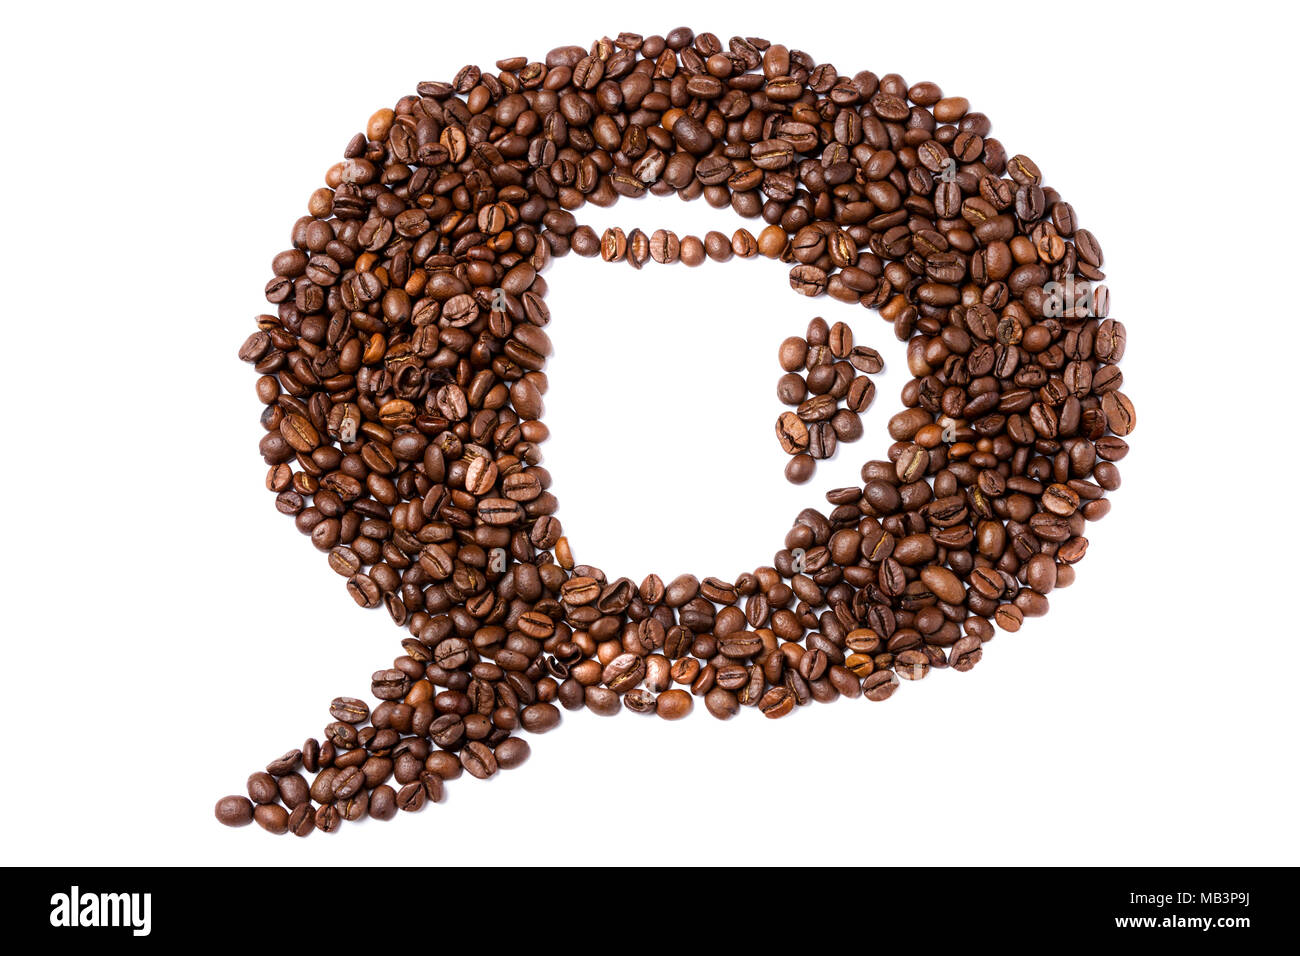 Coffee in shape of speech bubble with coffee mug inside on white background Stock Photo